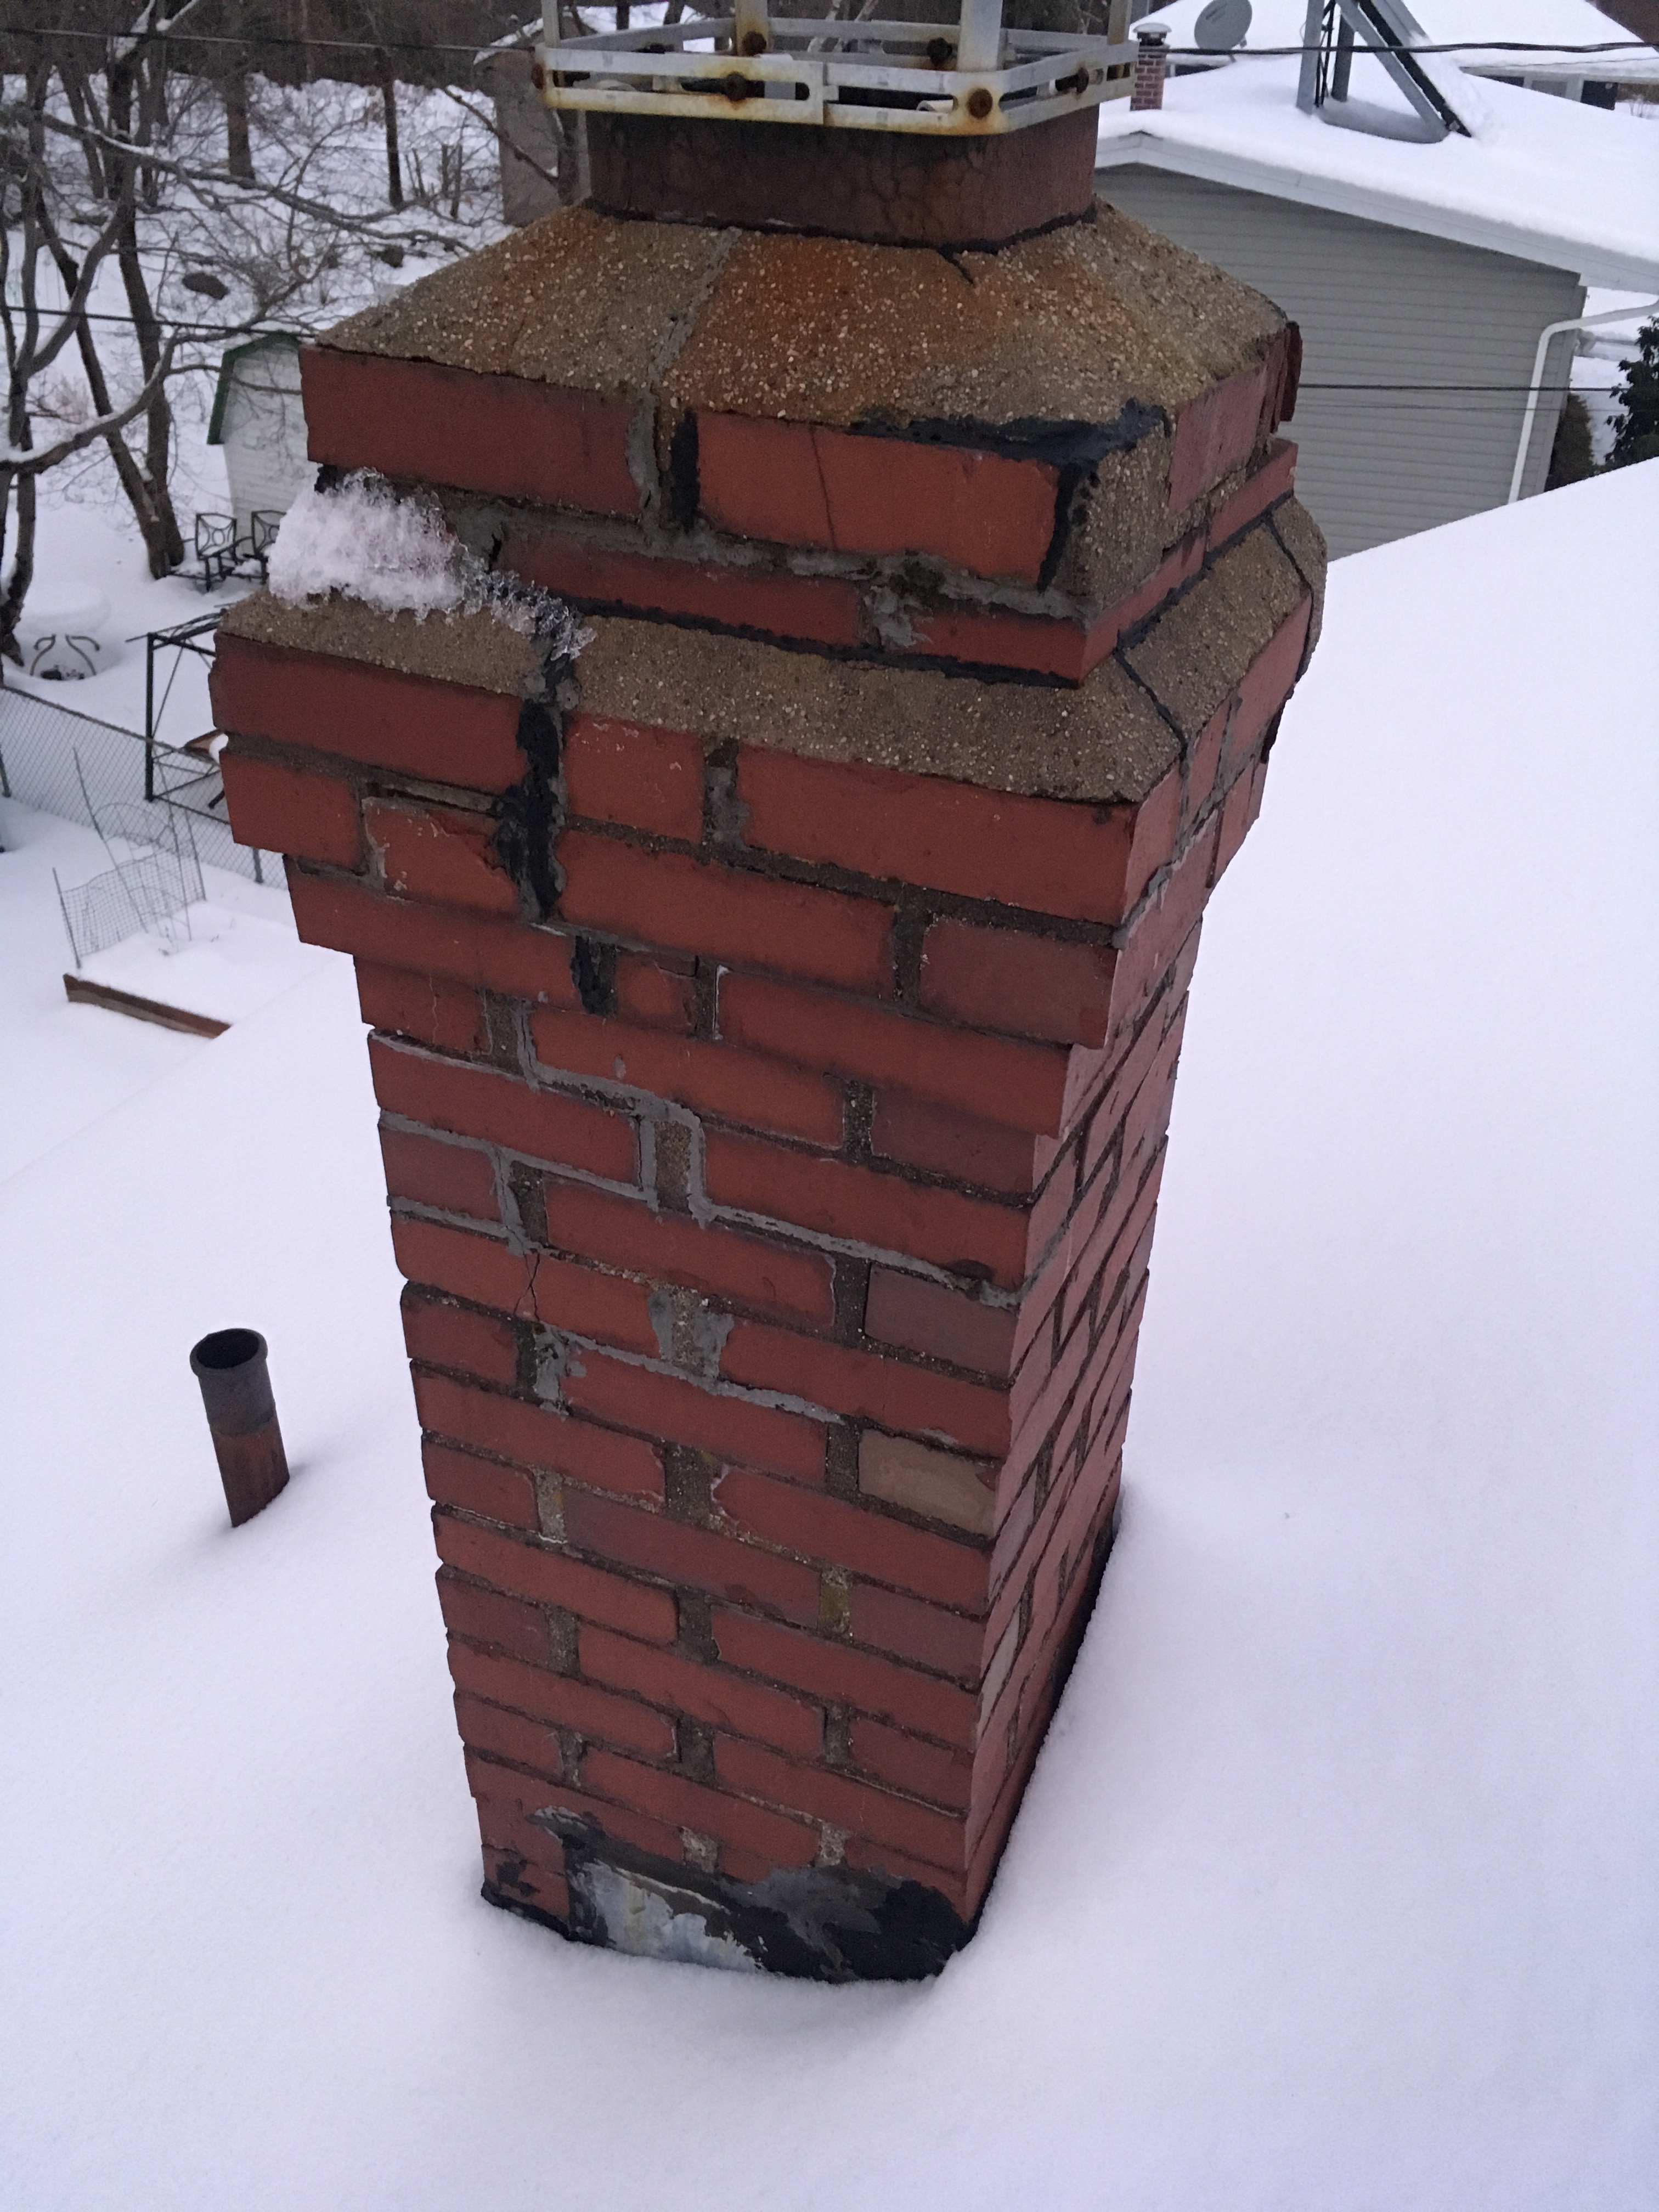 image of chimney construction-rebuild services completed in Fall River, NS by Pro Chimney Services based in Halifax, NS servicing all of the Halifax-Dartmouth Regional Municipality, Bedford, Sackville, Mount Uniacke, Windsor, Hantsport , Wolfville, Kentville, Chester, Mahone Bay, Lunenburg, Bridgewater, Liverpool, Fall River, Wellington, Enfield, Elmsdale, Brookfield, Truro, Musquodoboit Harbour & surrounding areas.